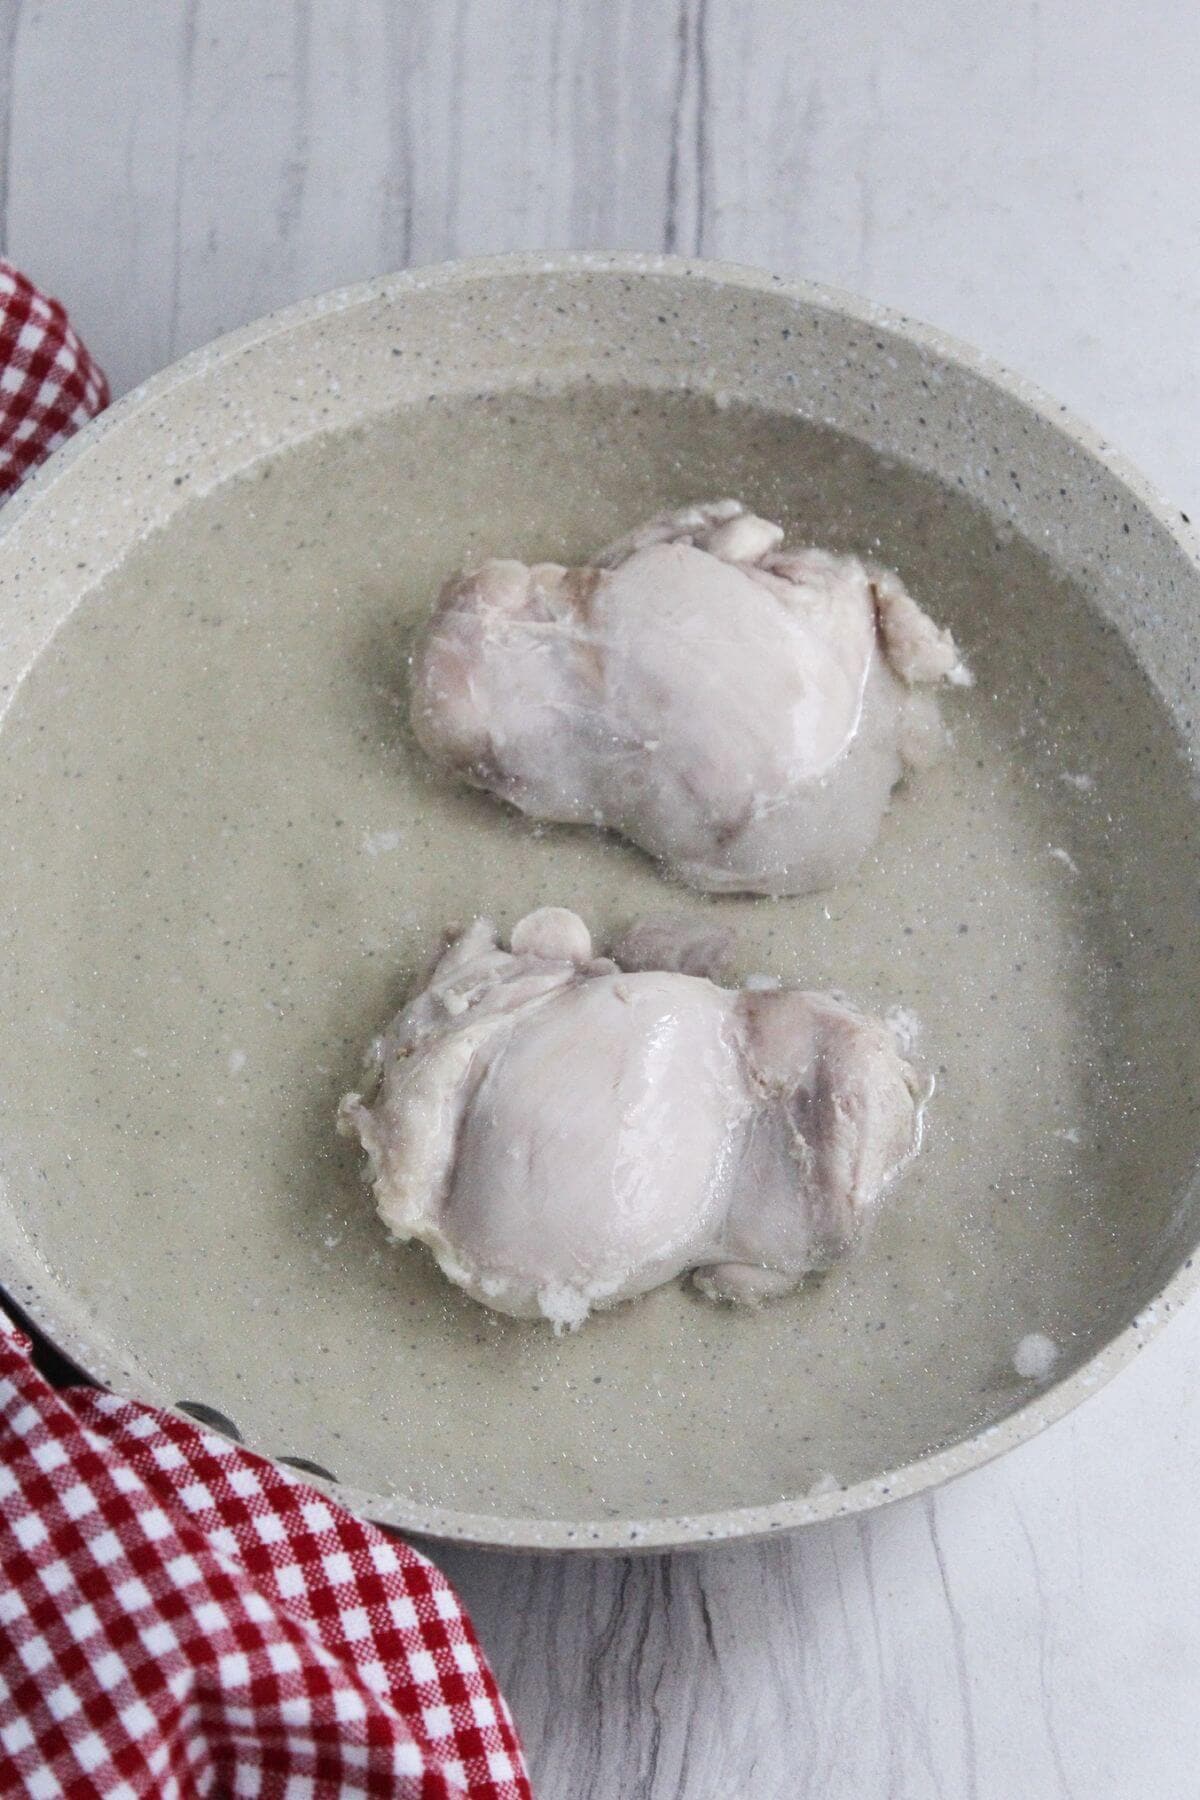 Two pieces of chicken thigh filets in a pan of water.